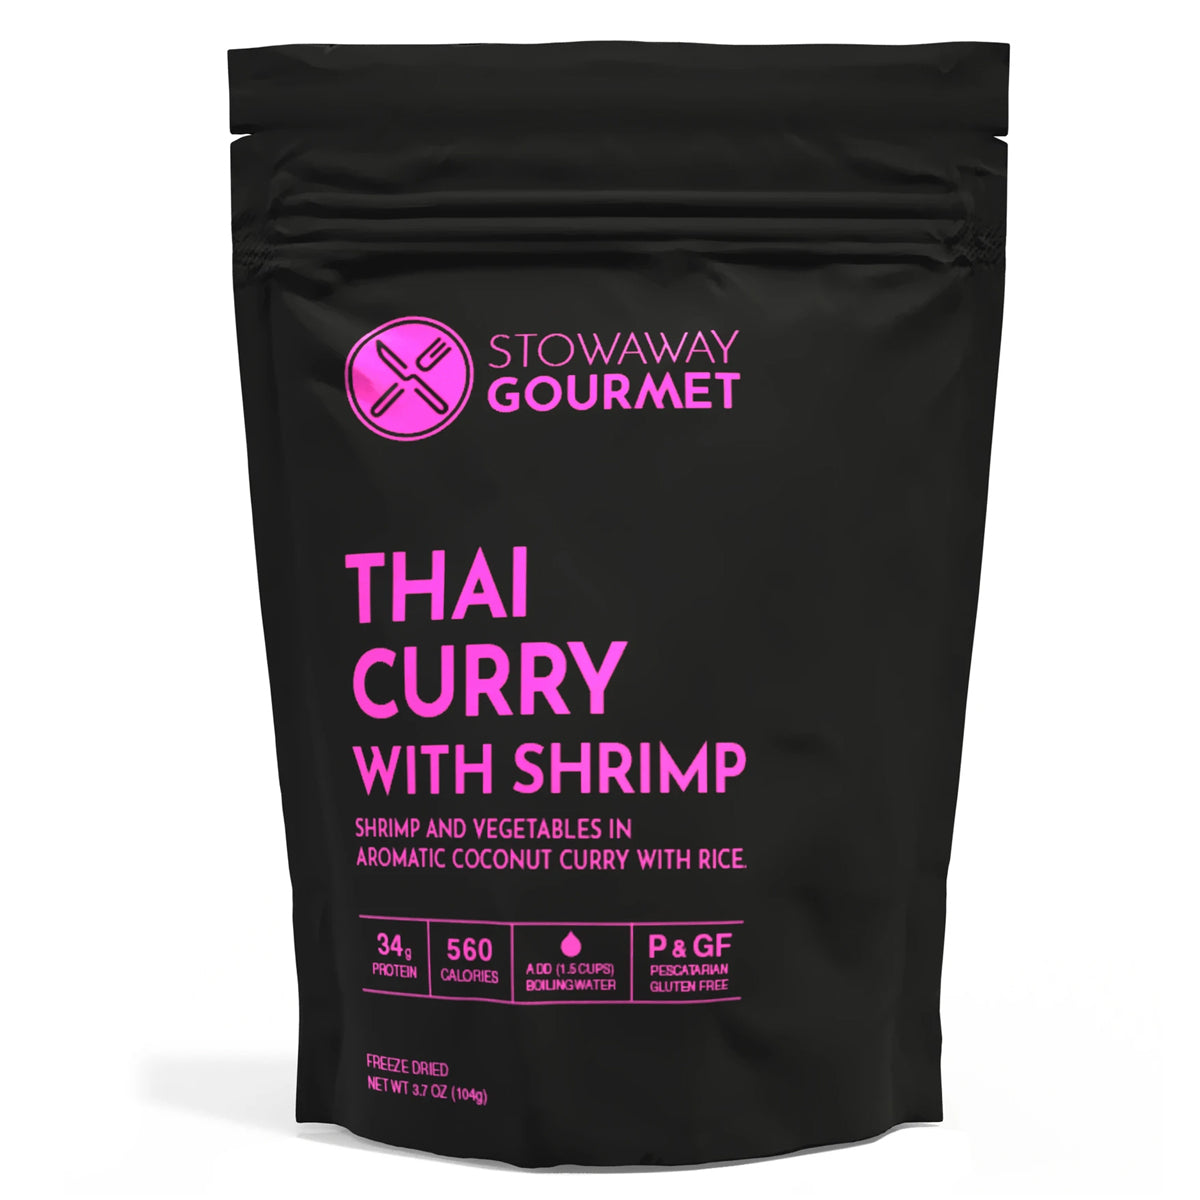 Stowaway Gourmet Thai Curry with Shrimp in  by GOHUNT | Stowaway Gourmet - GOHUNT Shop